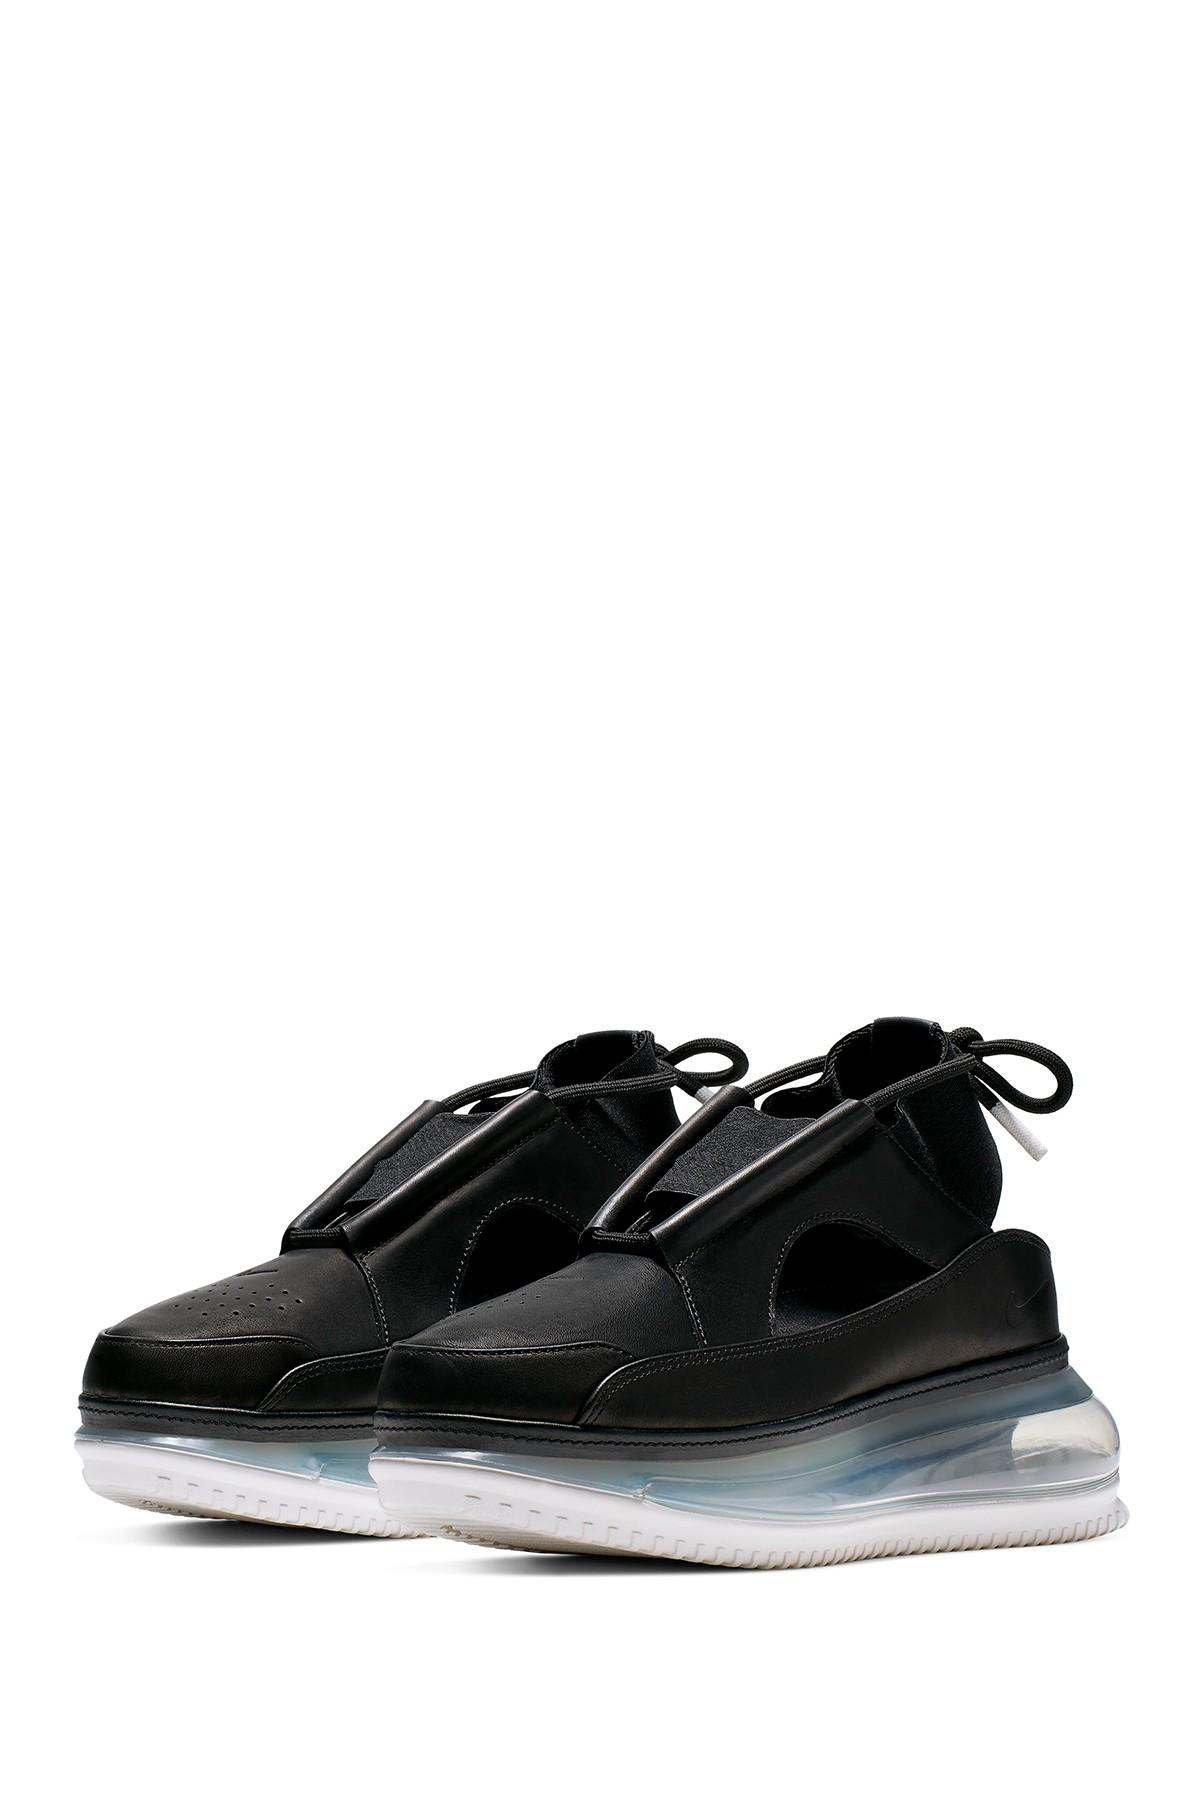 Nike Leather Air Max Ff 720 Shoe in Black | Lyst